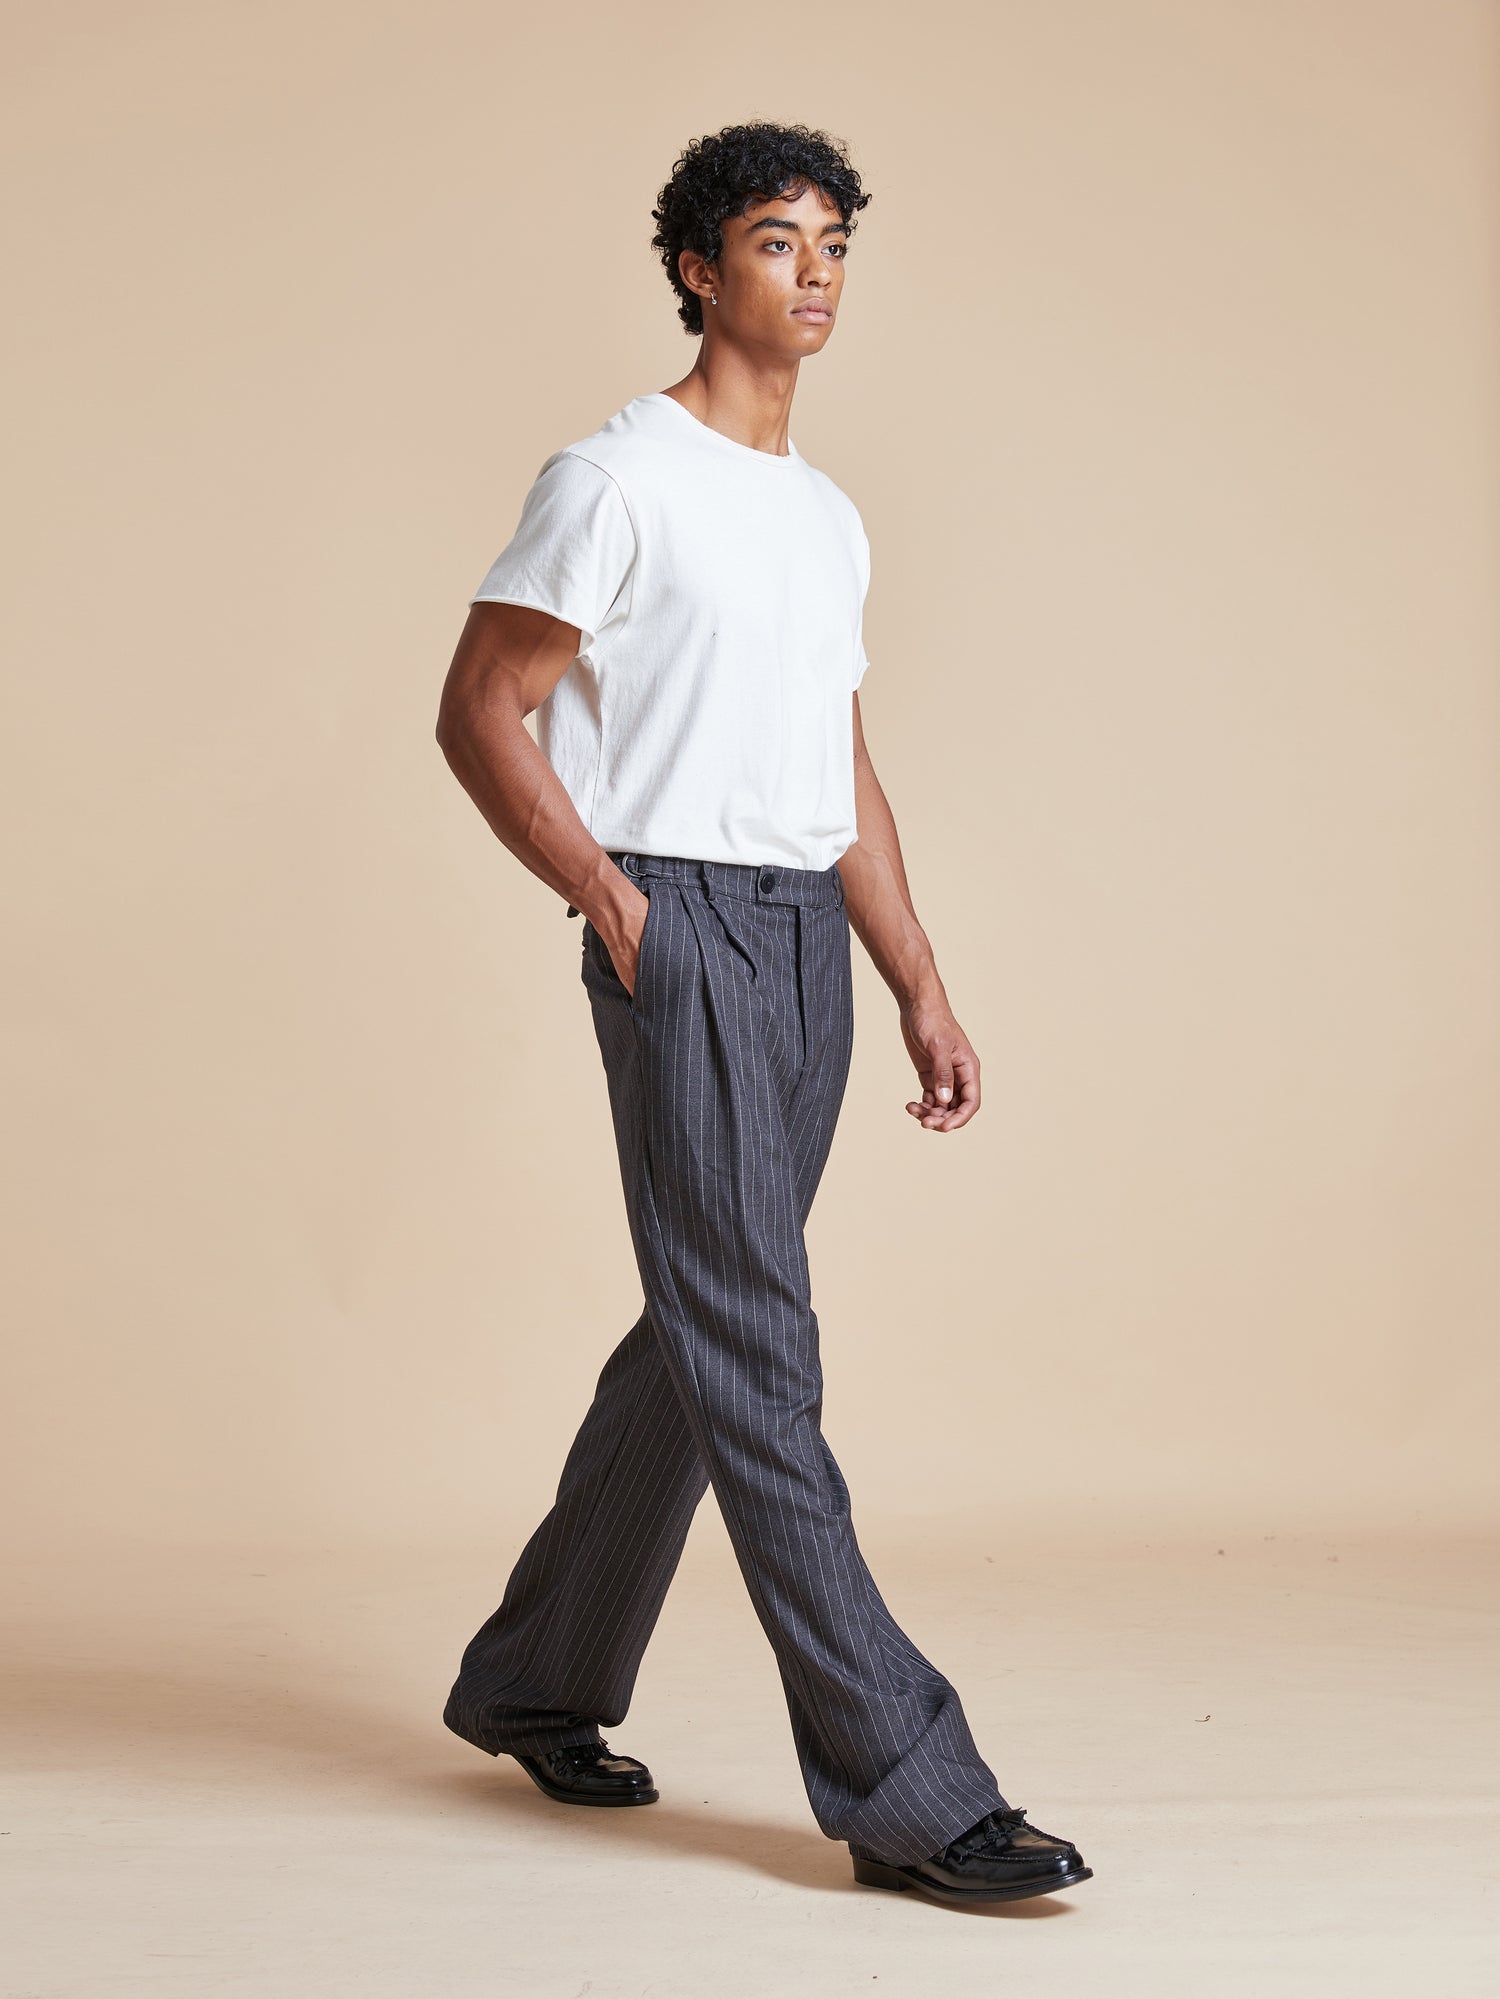 The model is wearing a white t-shirt and Found Pinstripe Pleated Trousers.